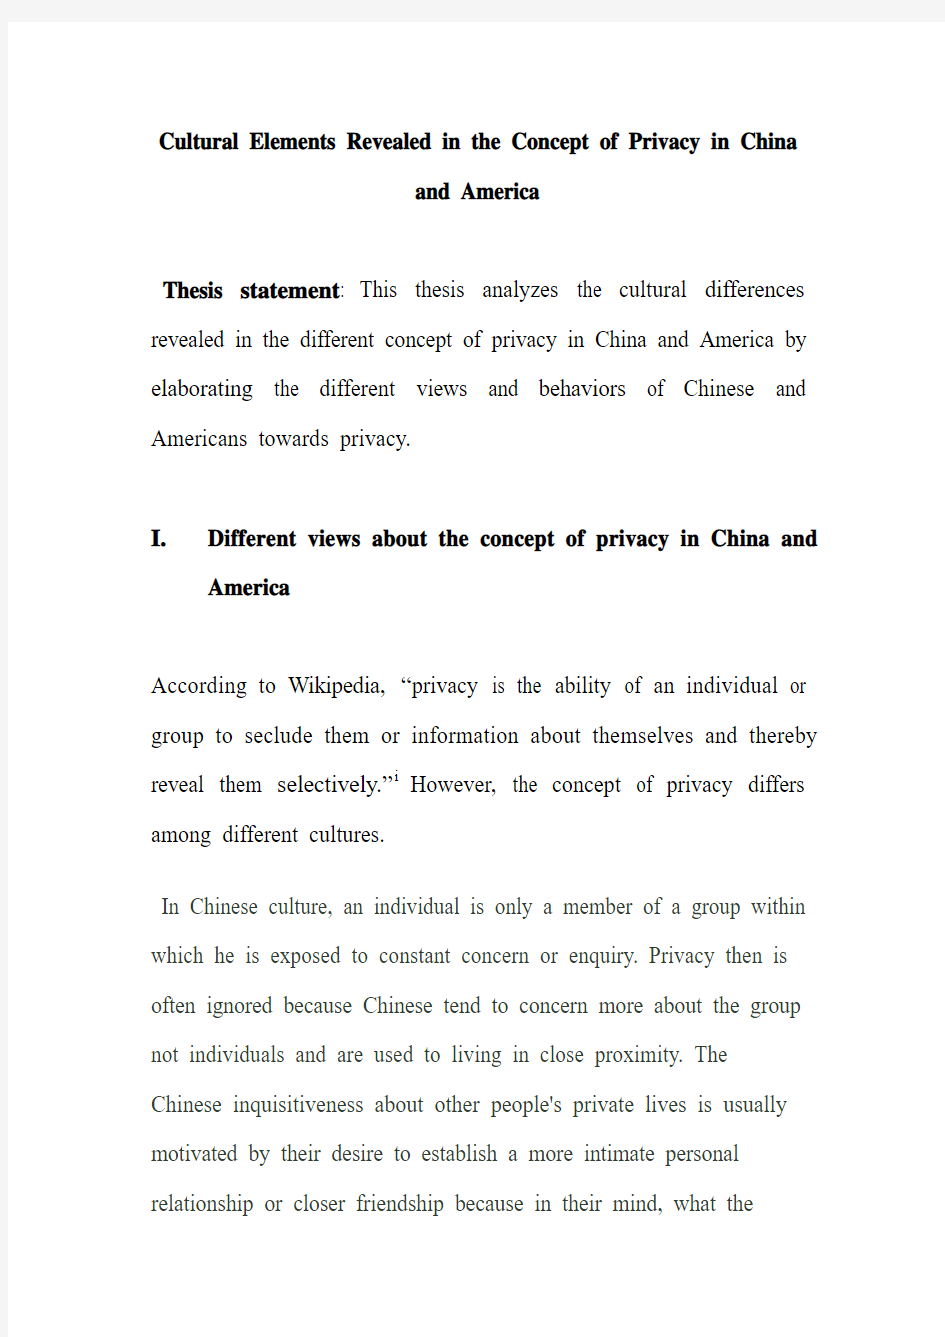 Cultural Elements Revealed in the Concept of Privacy in China and America